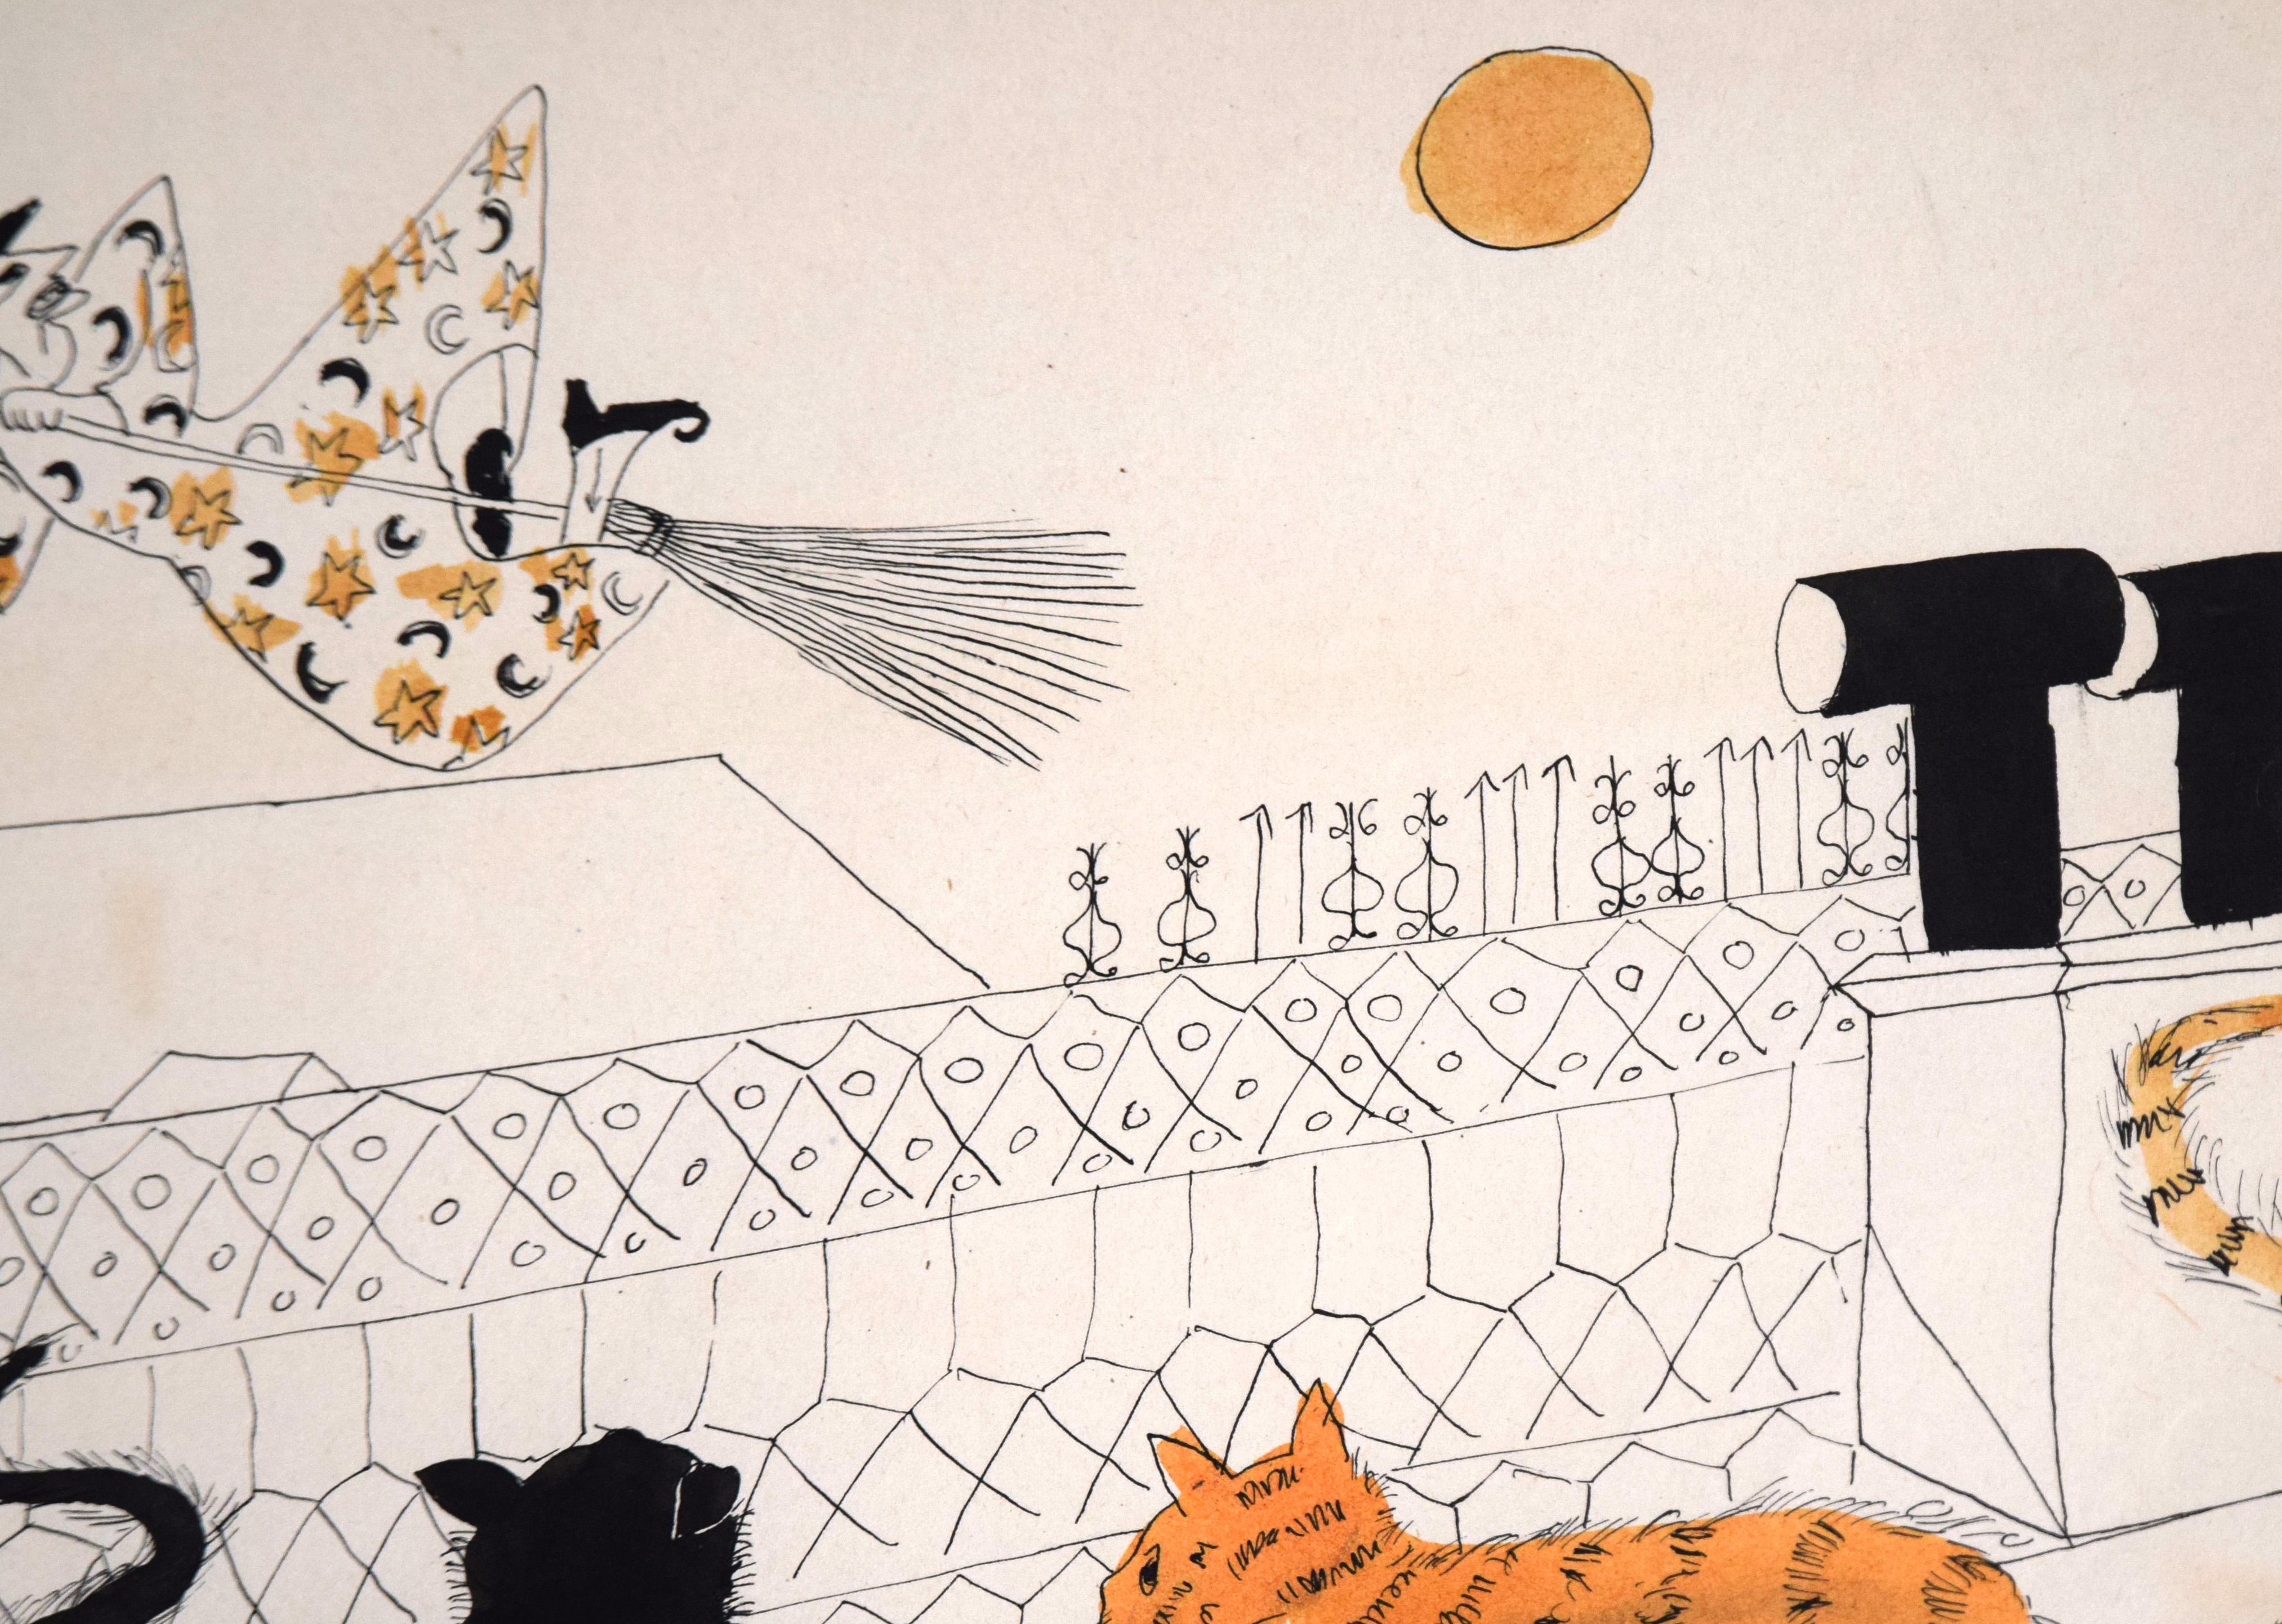 Cats Watching a Witch on a Broomstick - Illustration d'Halloween vintage à l'encre en vente 2